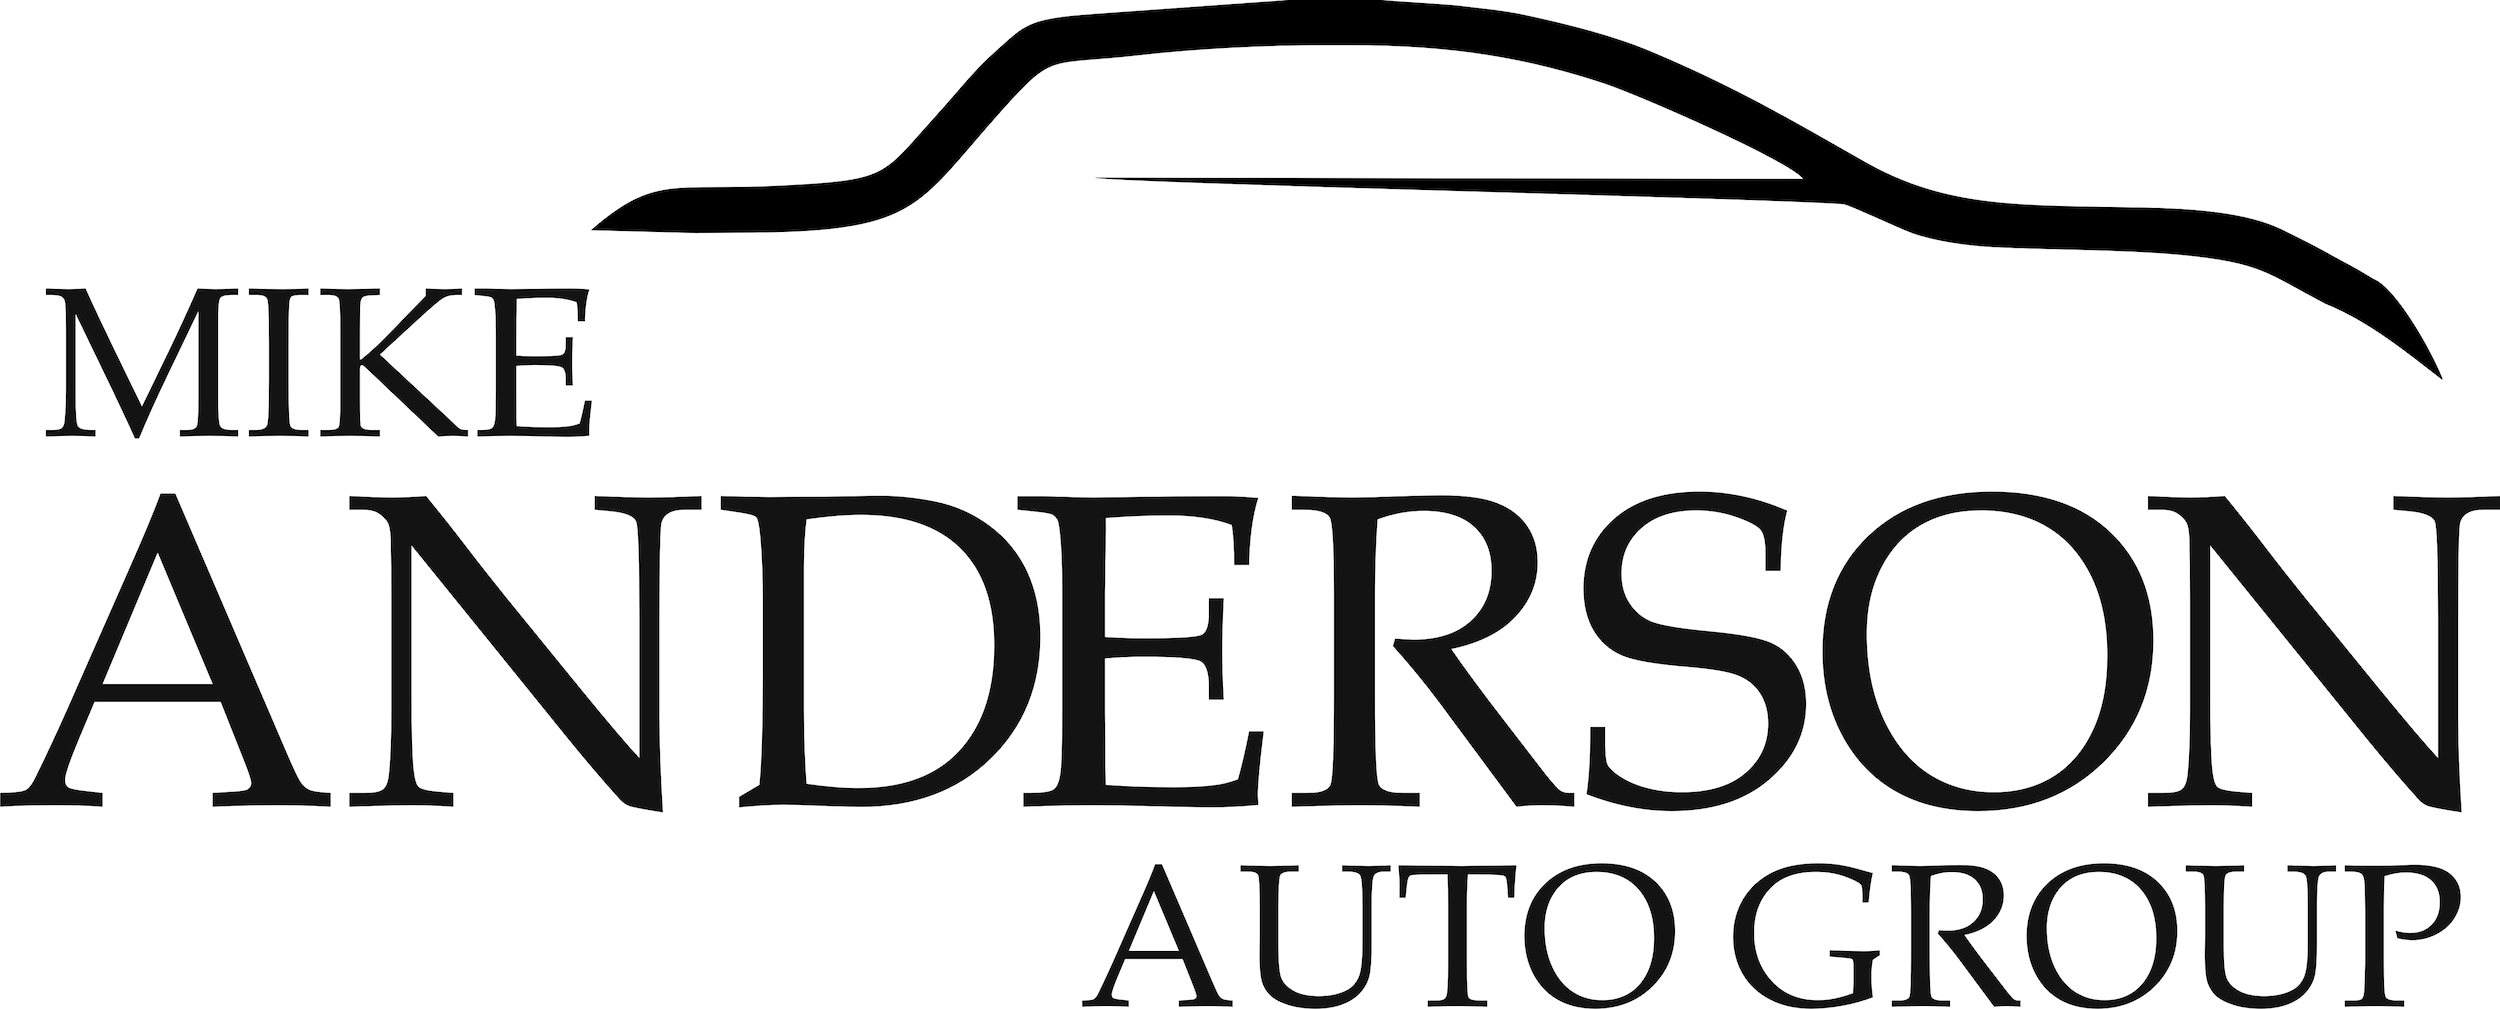 Mike anderson chrysler dodge #1